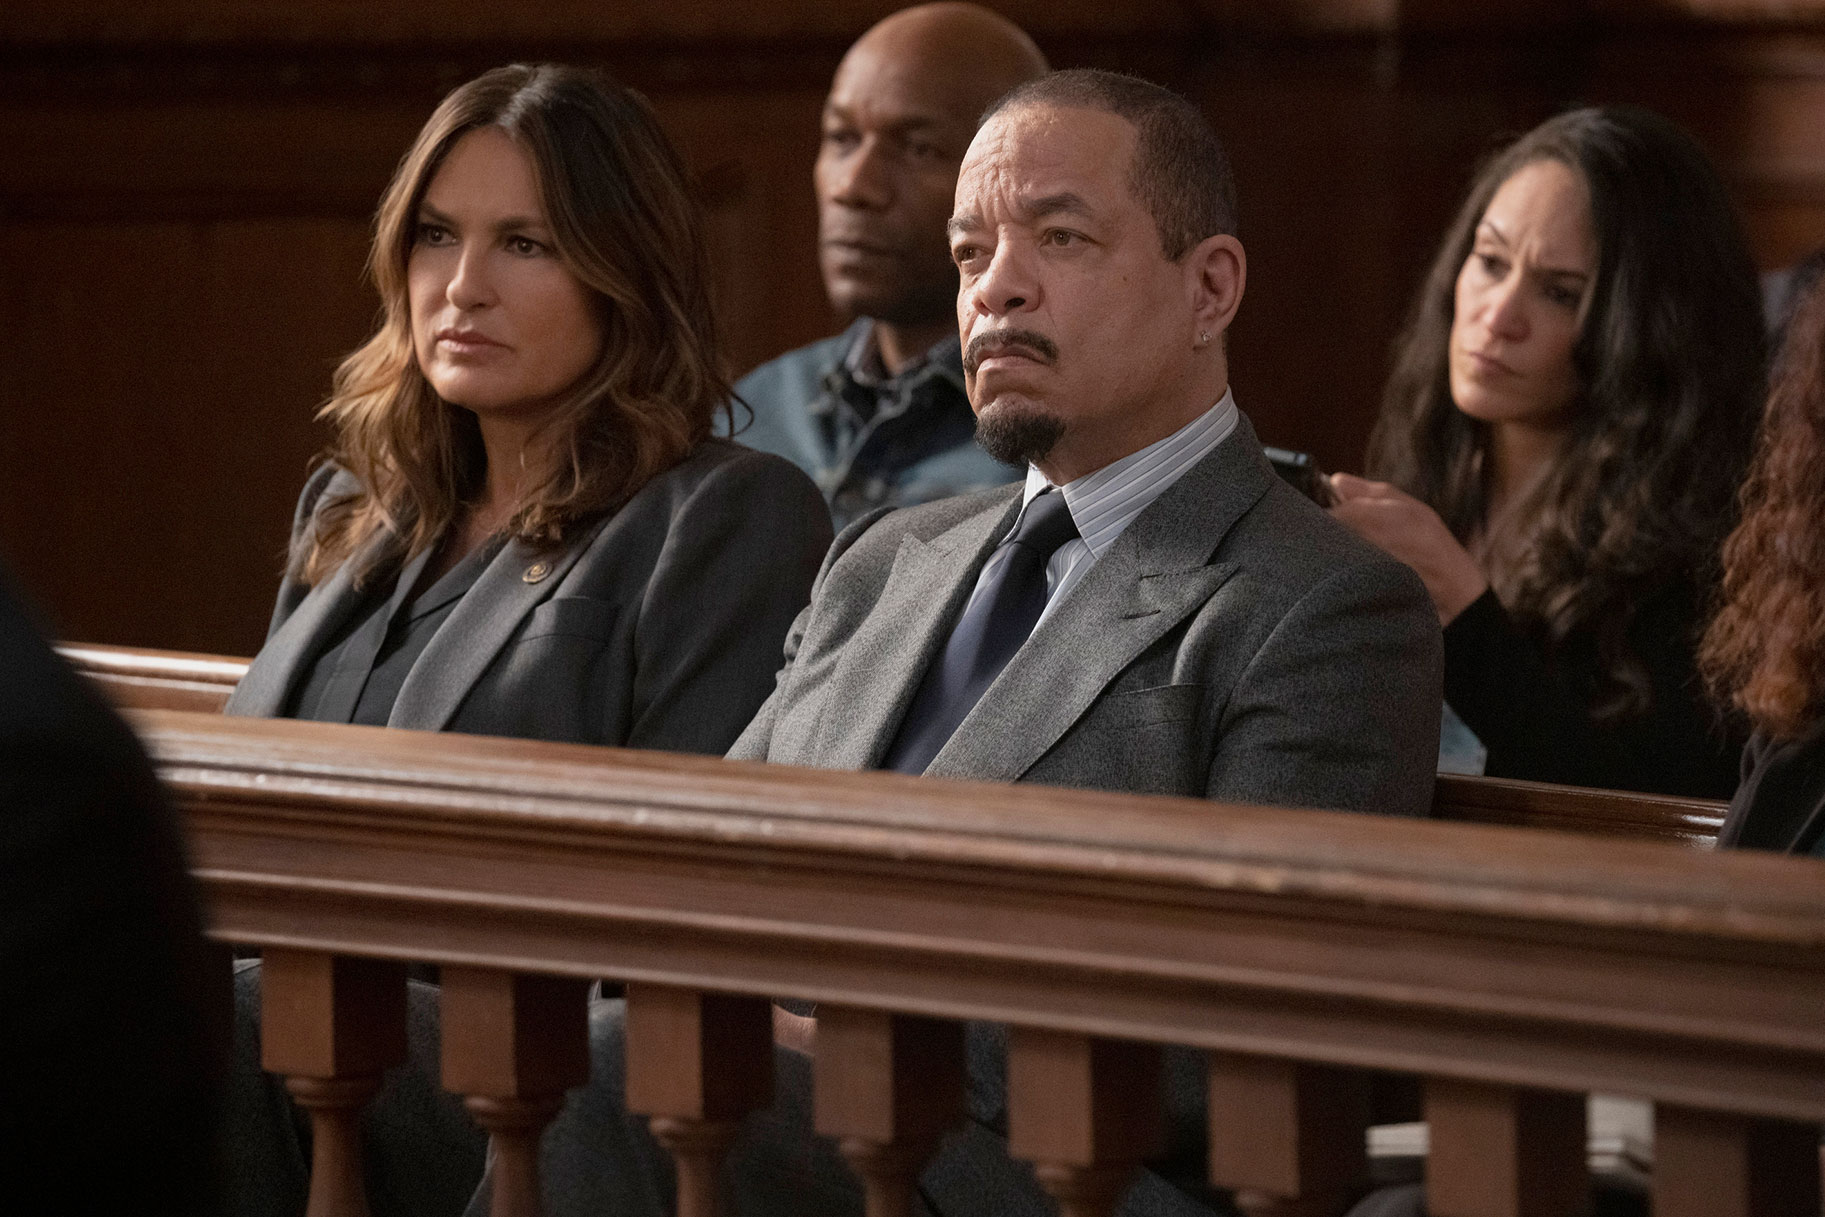 Captain Benson and Sergeant Odafin "Fin" Tutuola sitting at the back of a courtroom